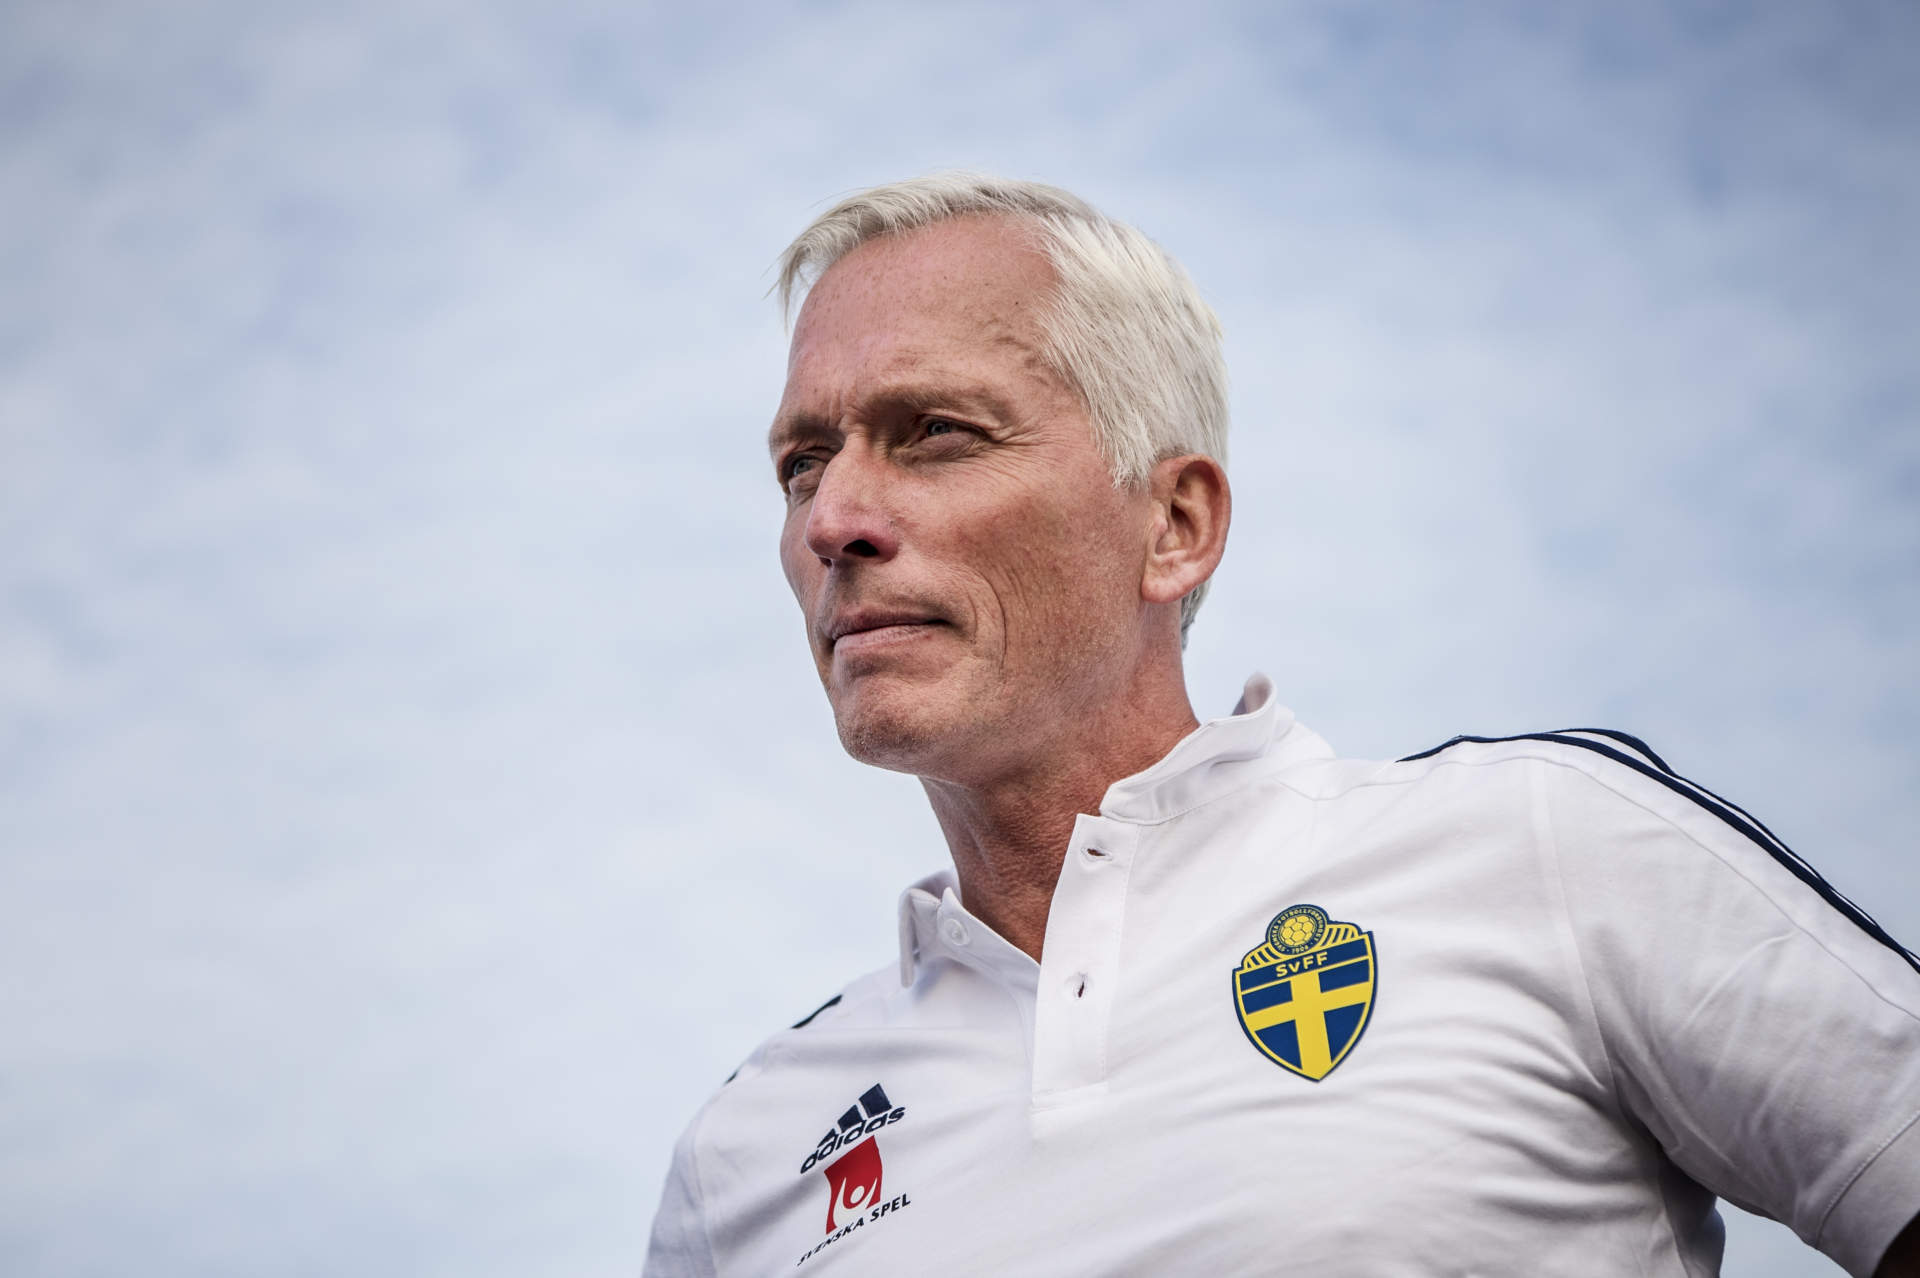 infr vm 2018 i ryssland. hkan sjstrand, generalsekreterare sverige svenska fotbollfrbundet svff, p biltemas parkering utanfr katrineholm dr han och janne andersson spikade att janne skulle bli frbundskapten